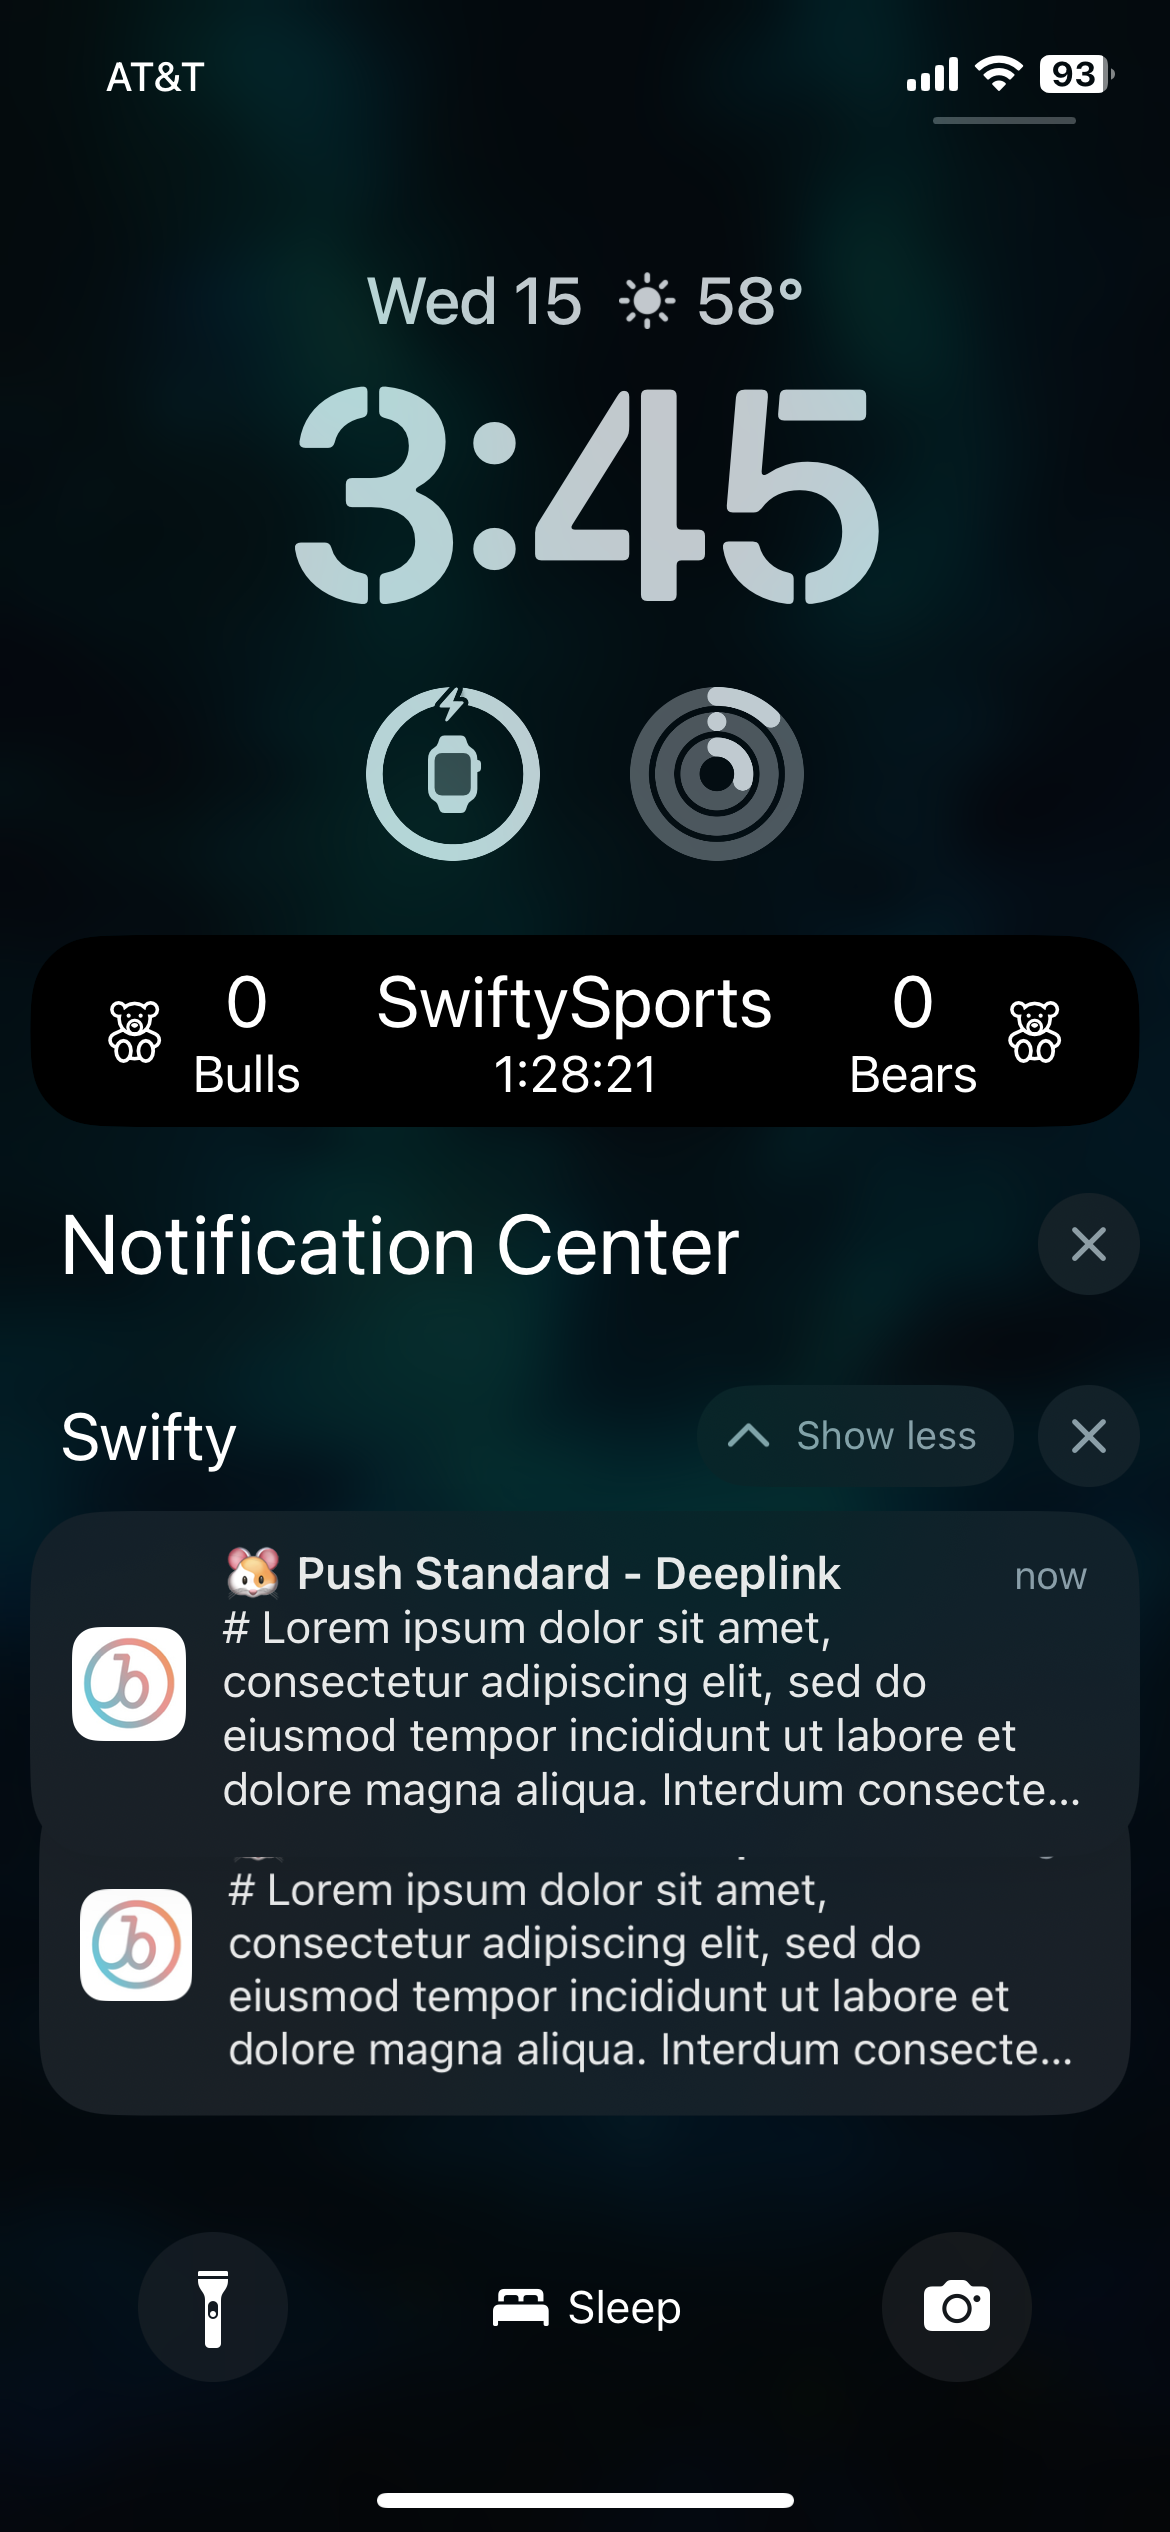 A phone screen with a Bulls vs Bears sports game live activity toward the middle of the screen and push notification lorem ipsum text at the bottom of the screen.